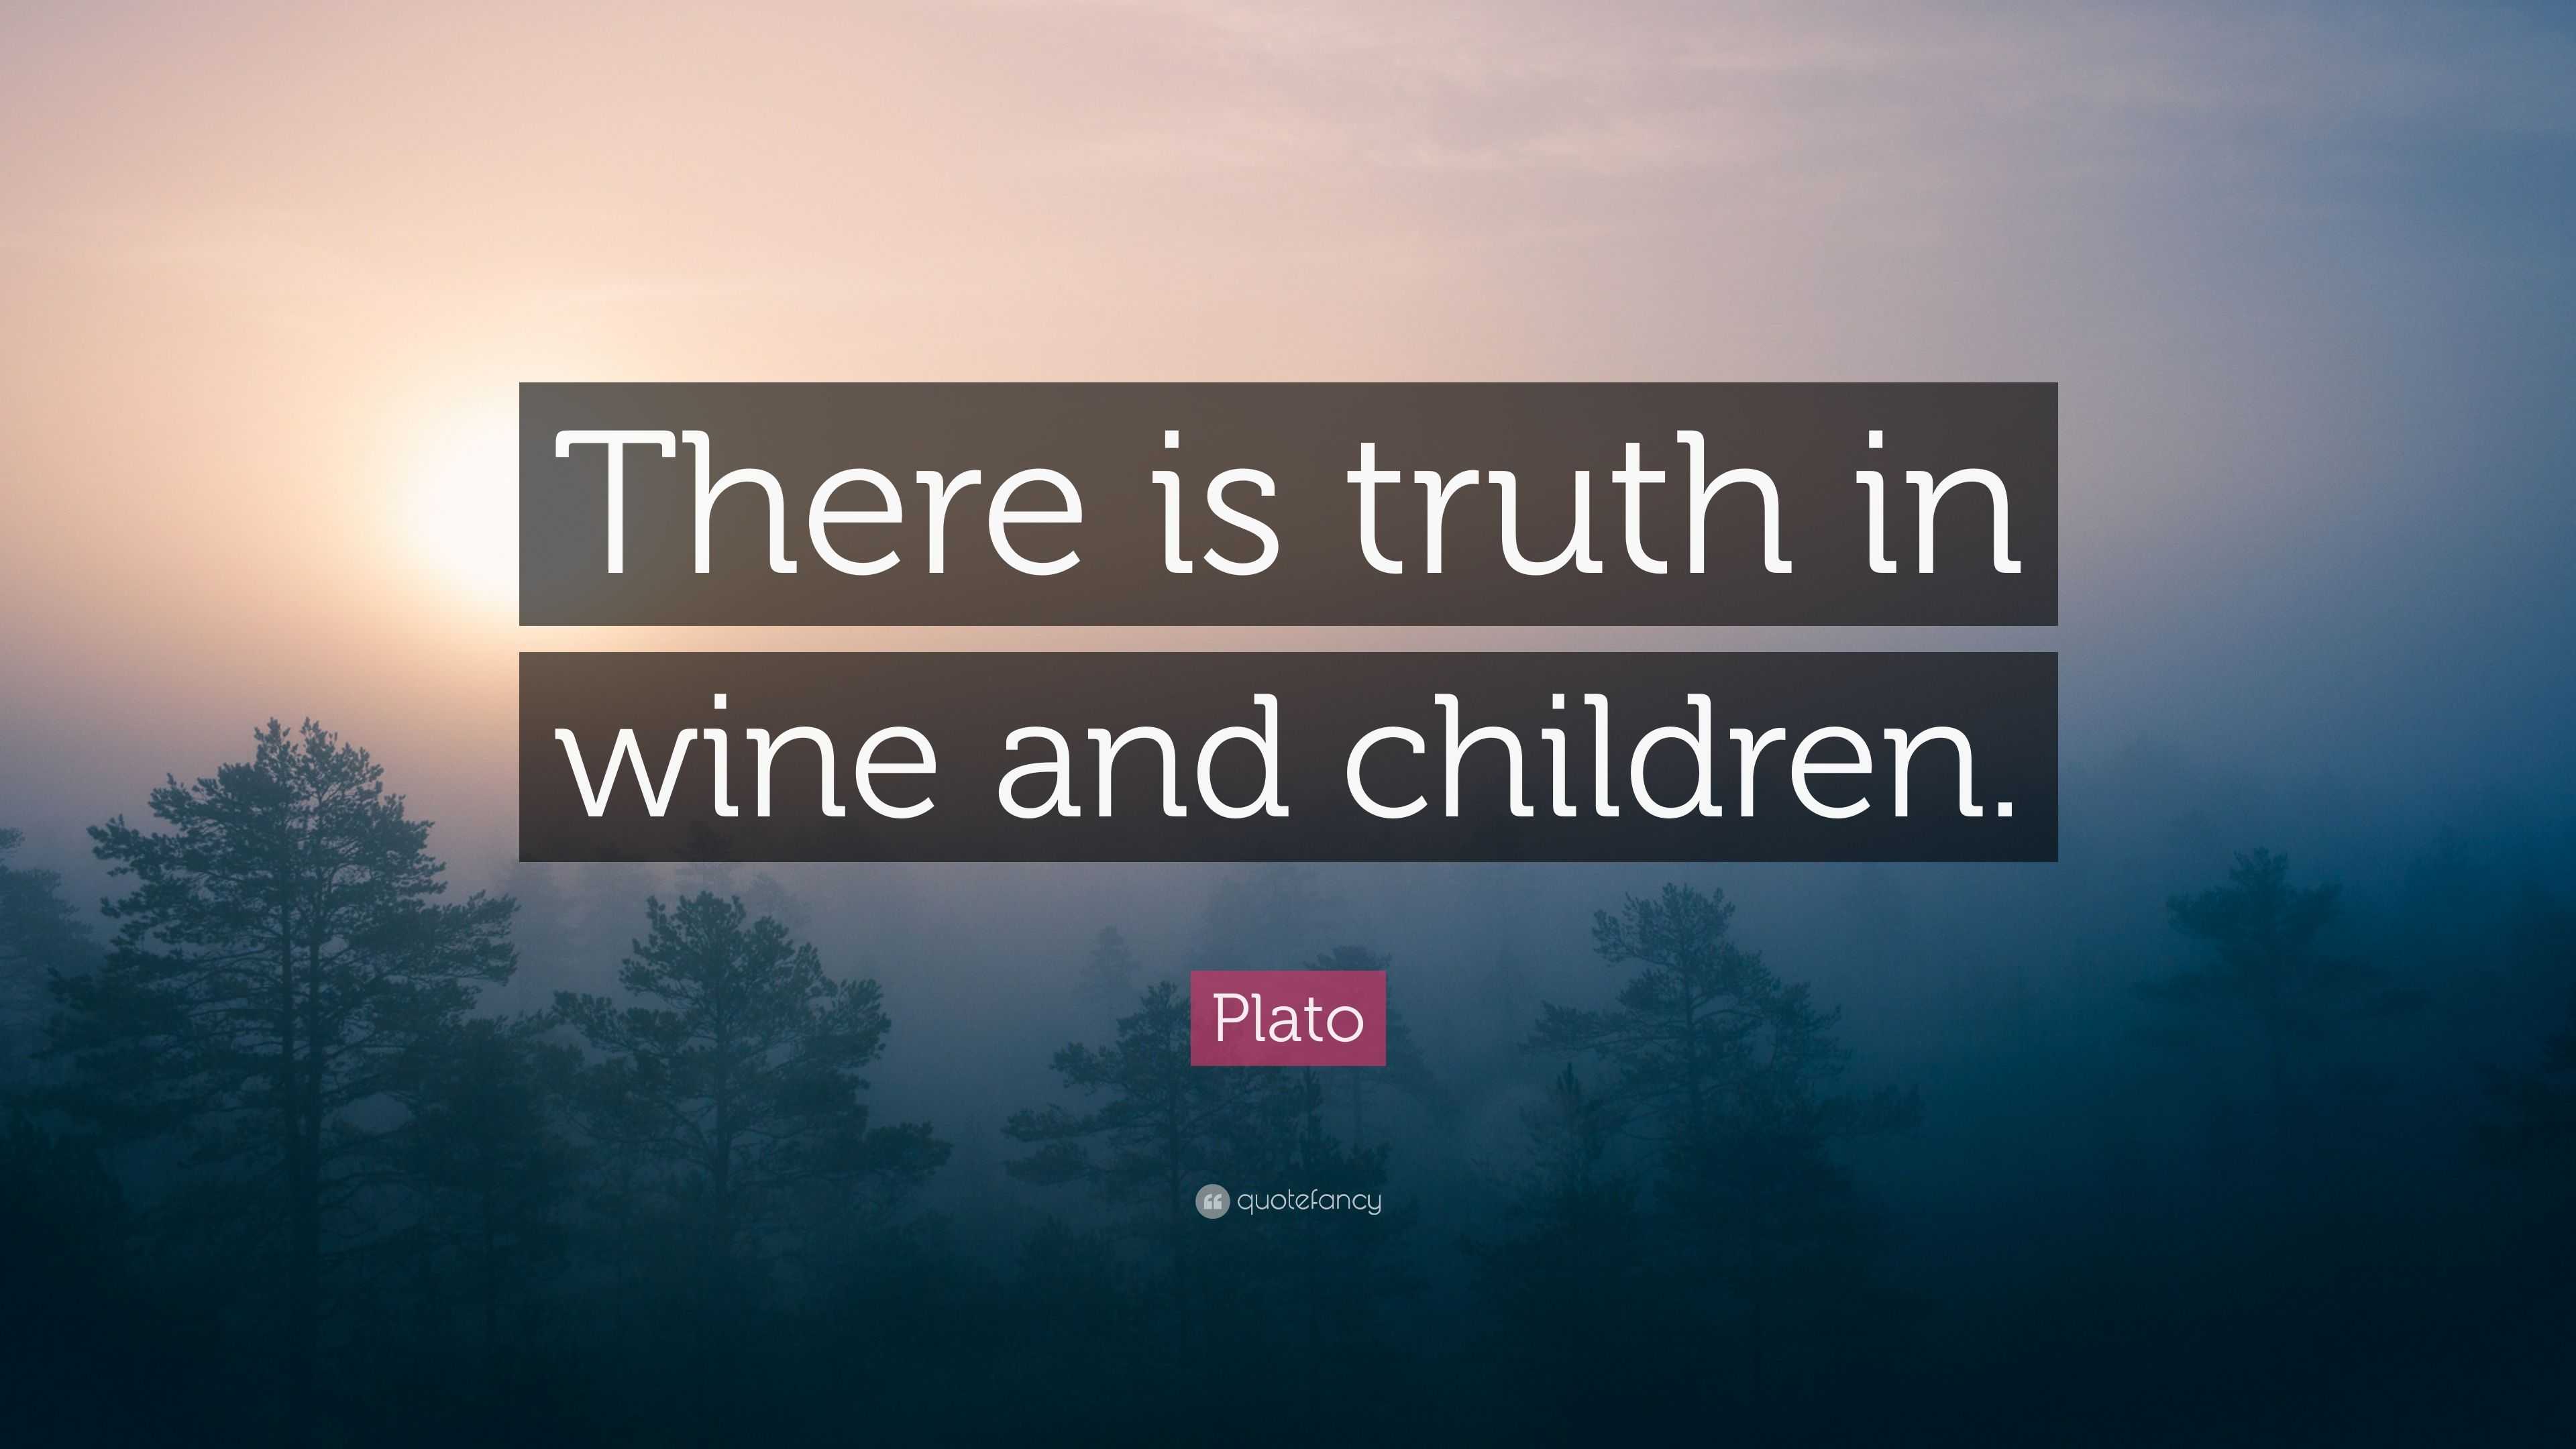 Is in there wine truth in wine,